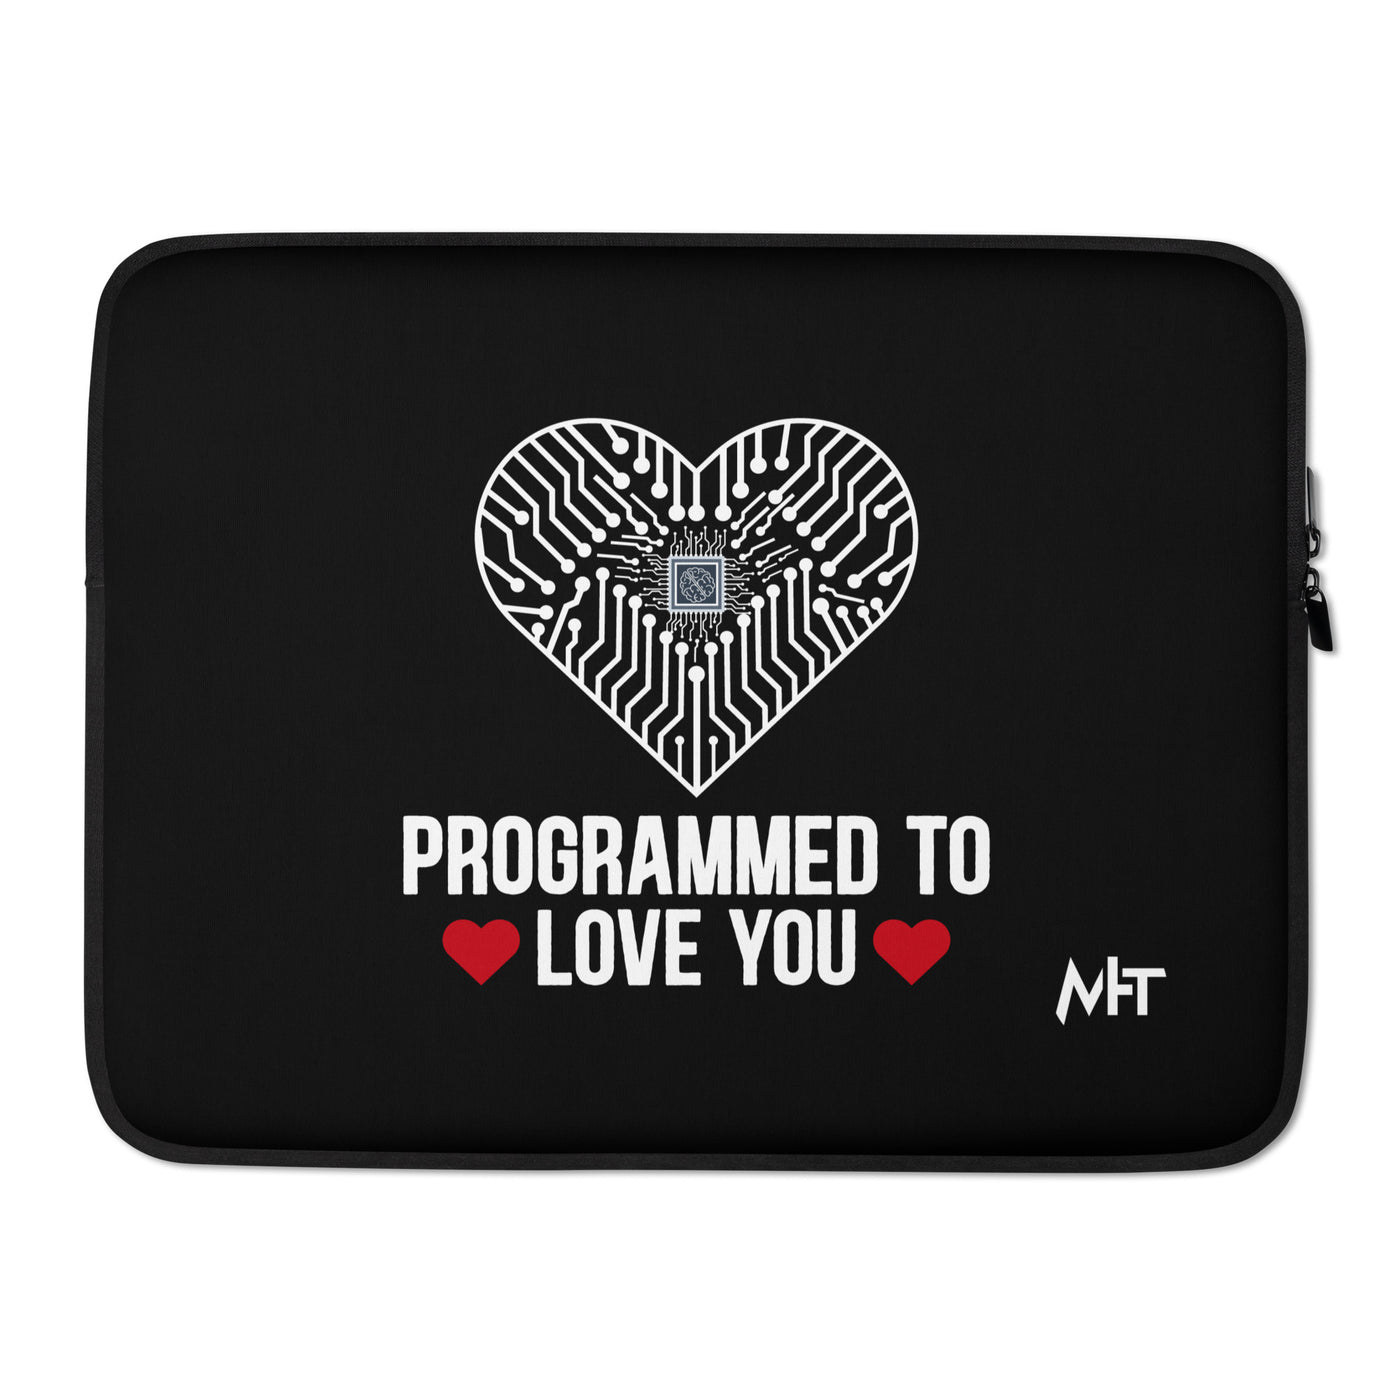 Programmed to Love you - Laptop Sleeve